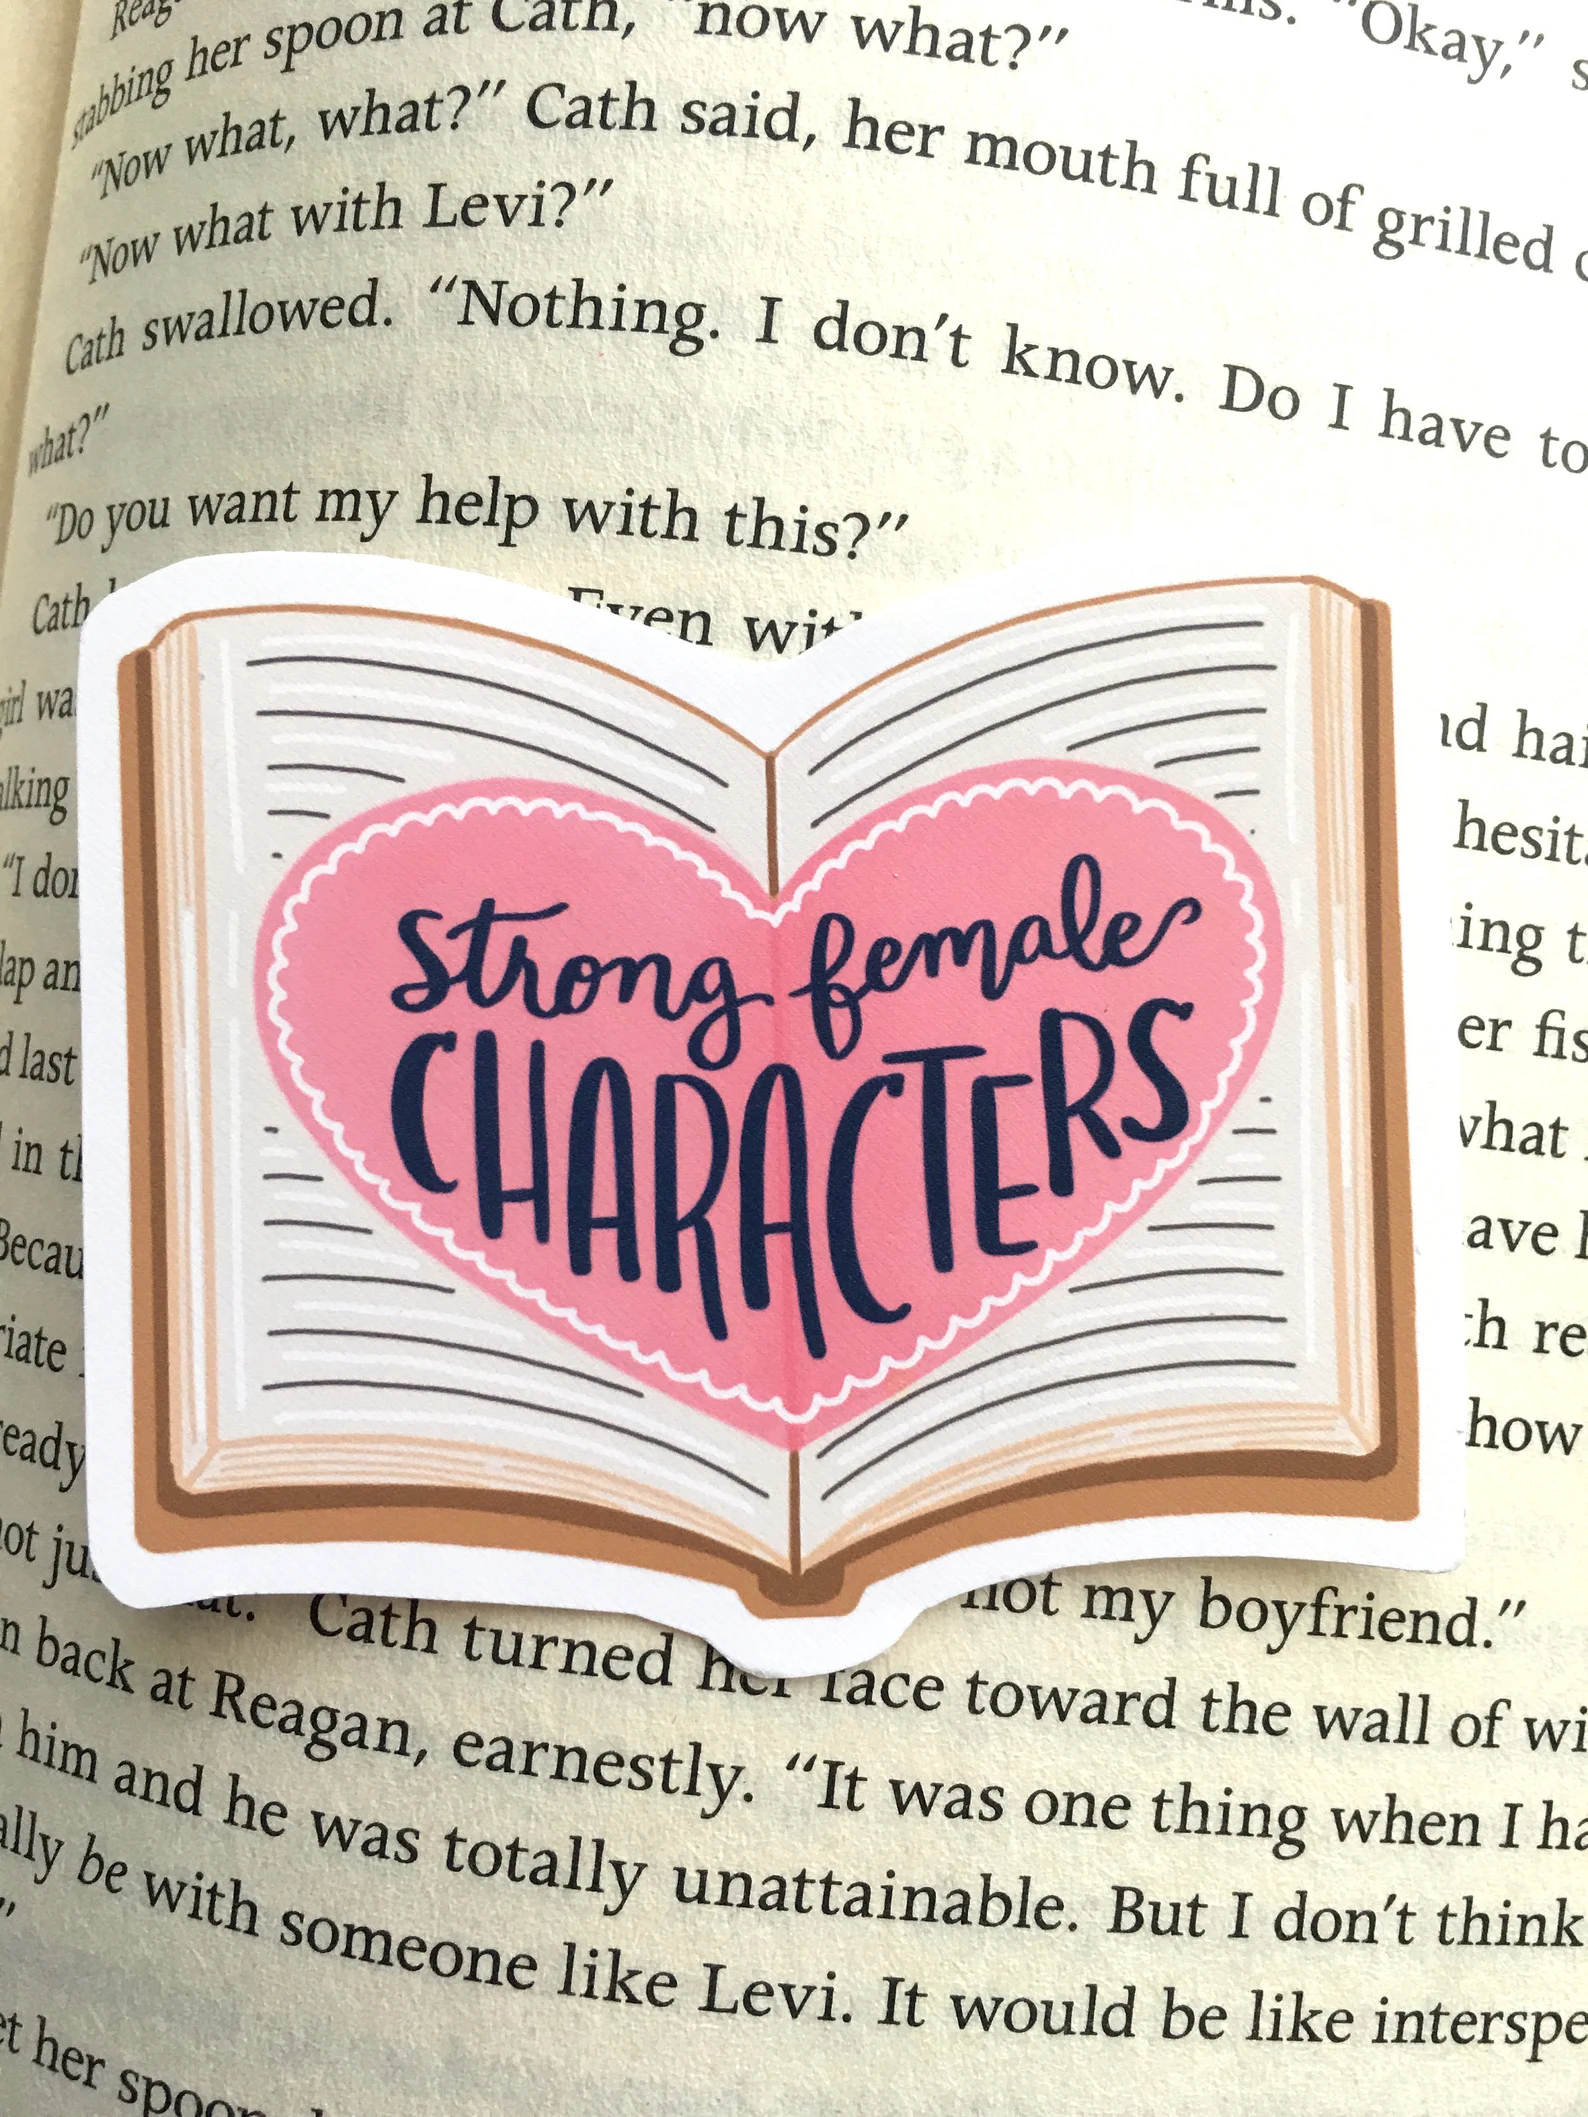 A sticker of an open book with a heart inside that reads "Strong female characters"